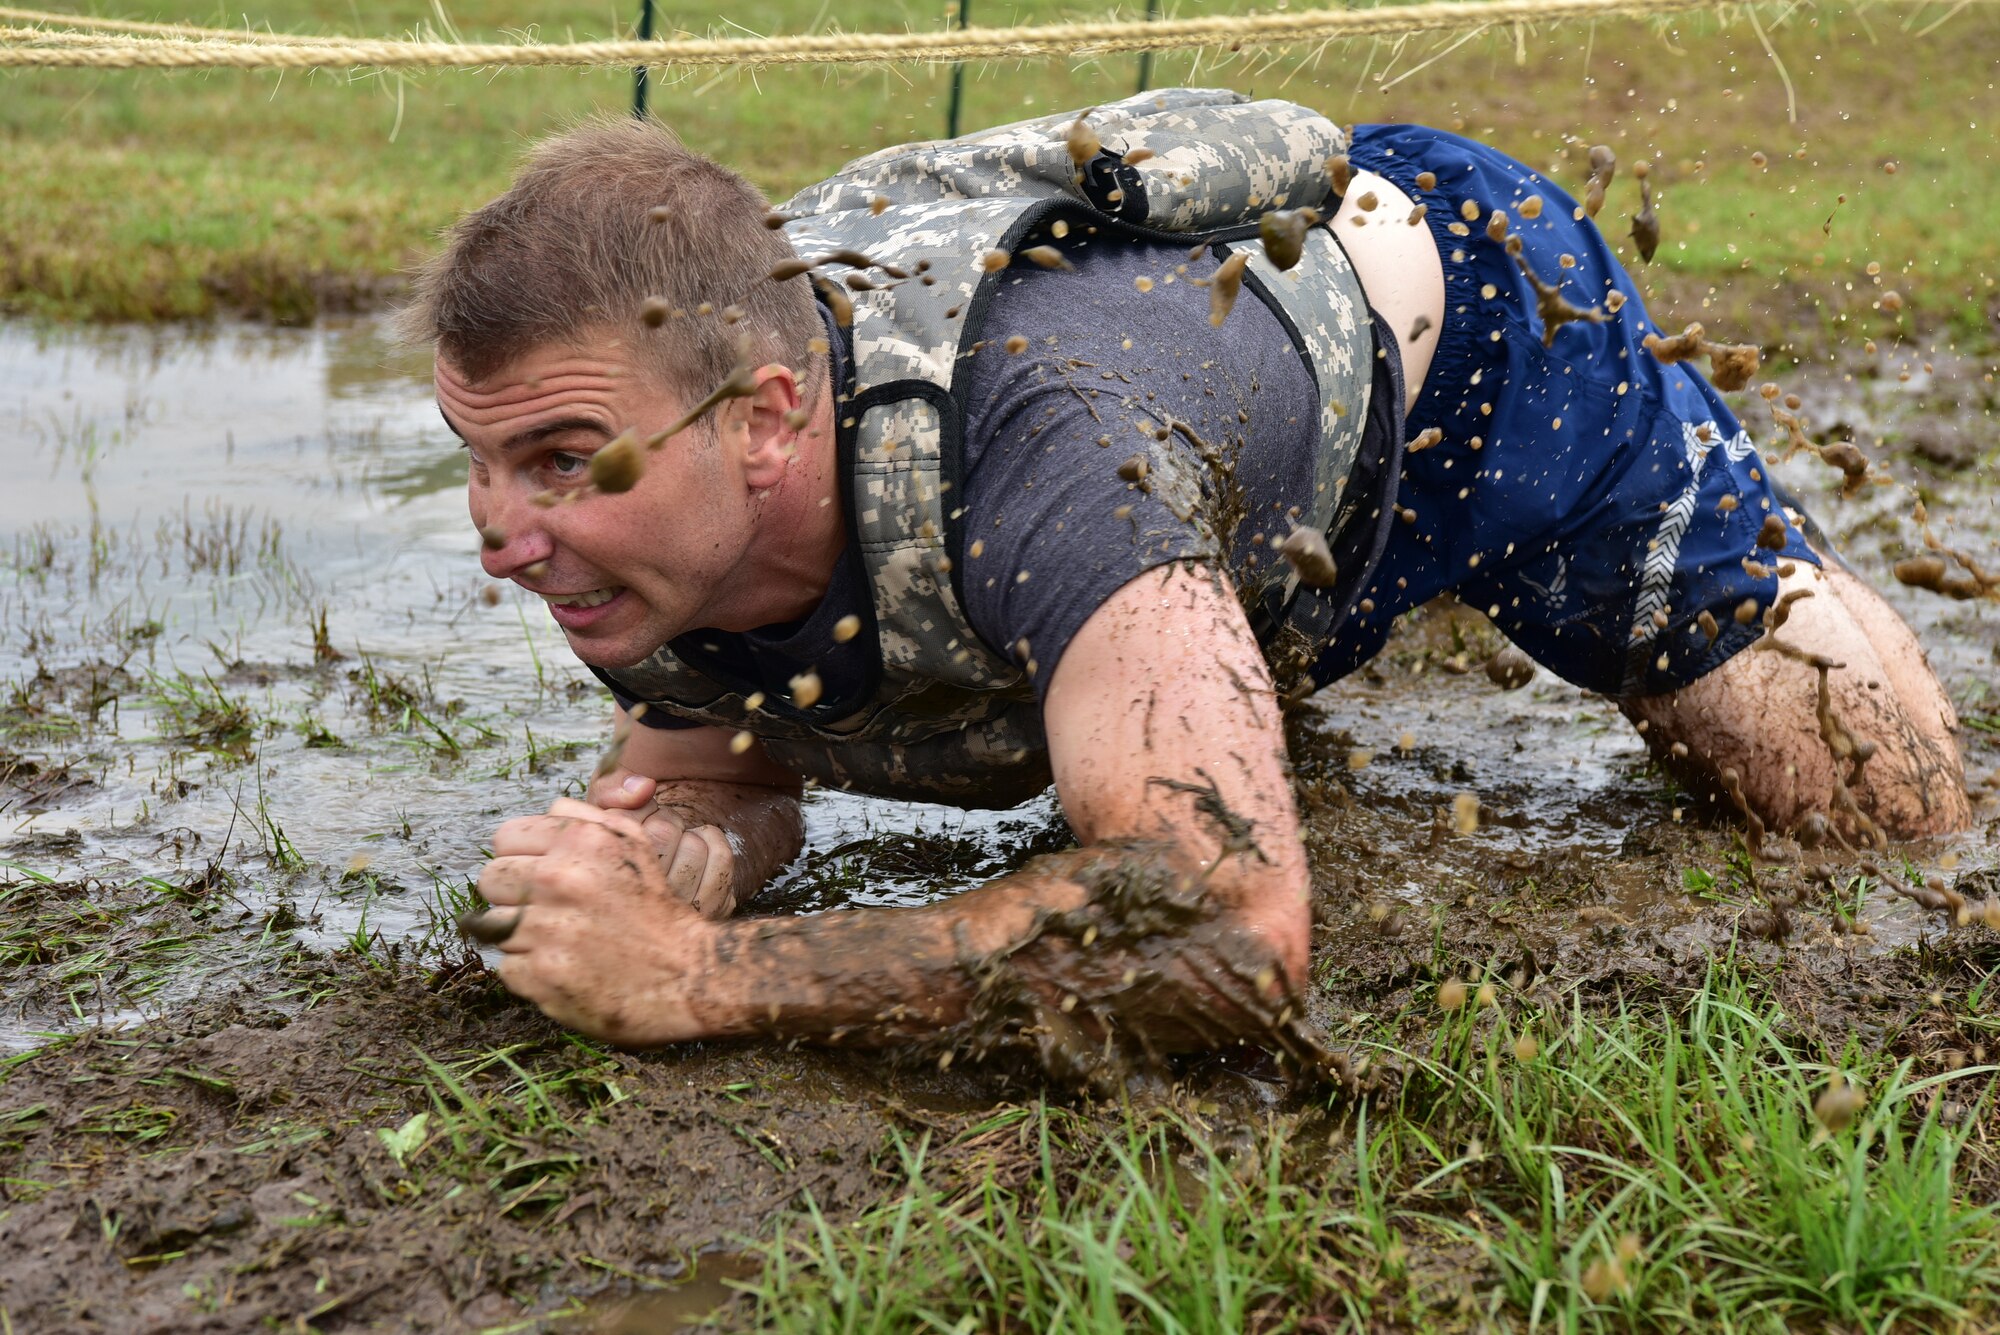 An Airman low crawls through the mud during the SAPR CLEAR challenge.